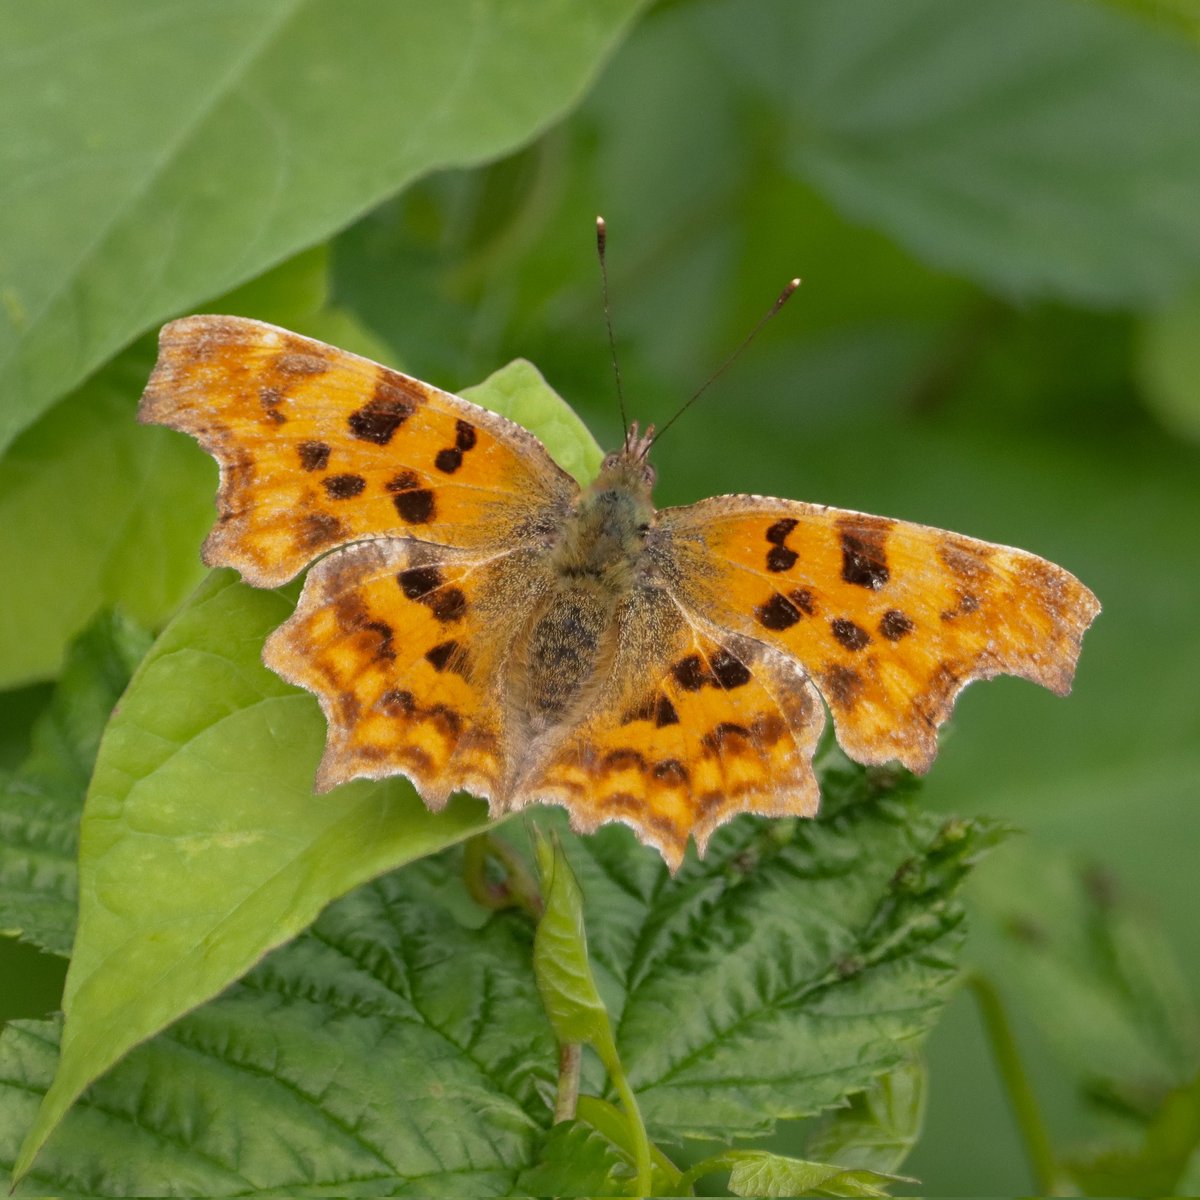 Comma  #butterfly at Magor Marsh this morning  #GwentLevels @GwentWildlife  #Wales #wildlifephotography  #TwitterNatureCommunity #NaturePhotography #Nature #Insectphotography #Butterflies #Insects #naturelovers #nature